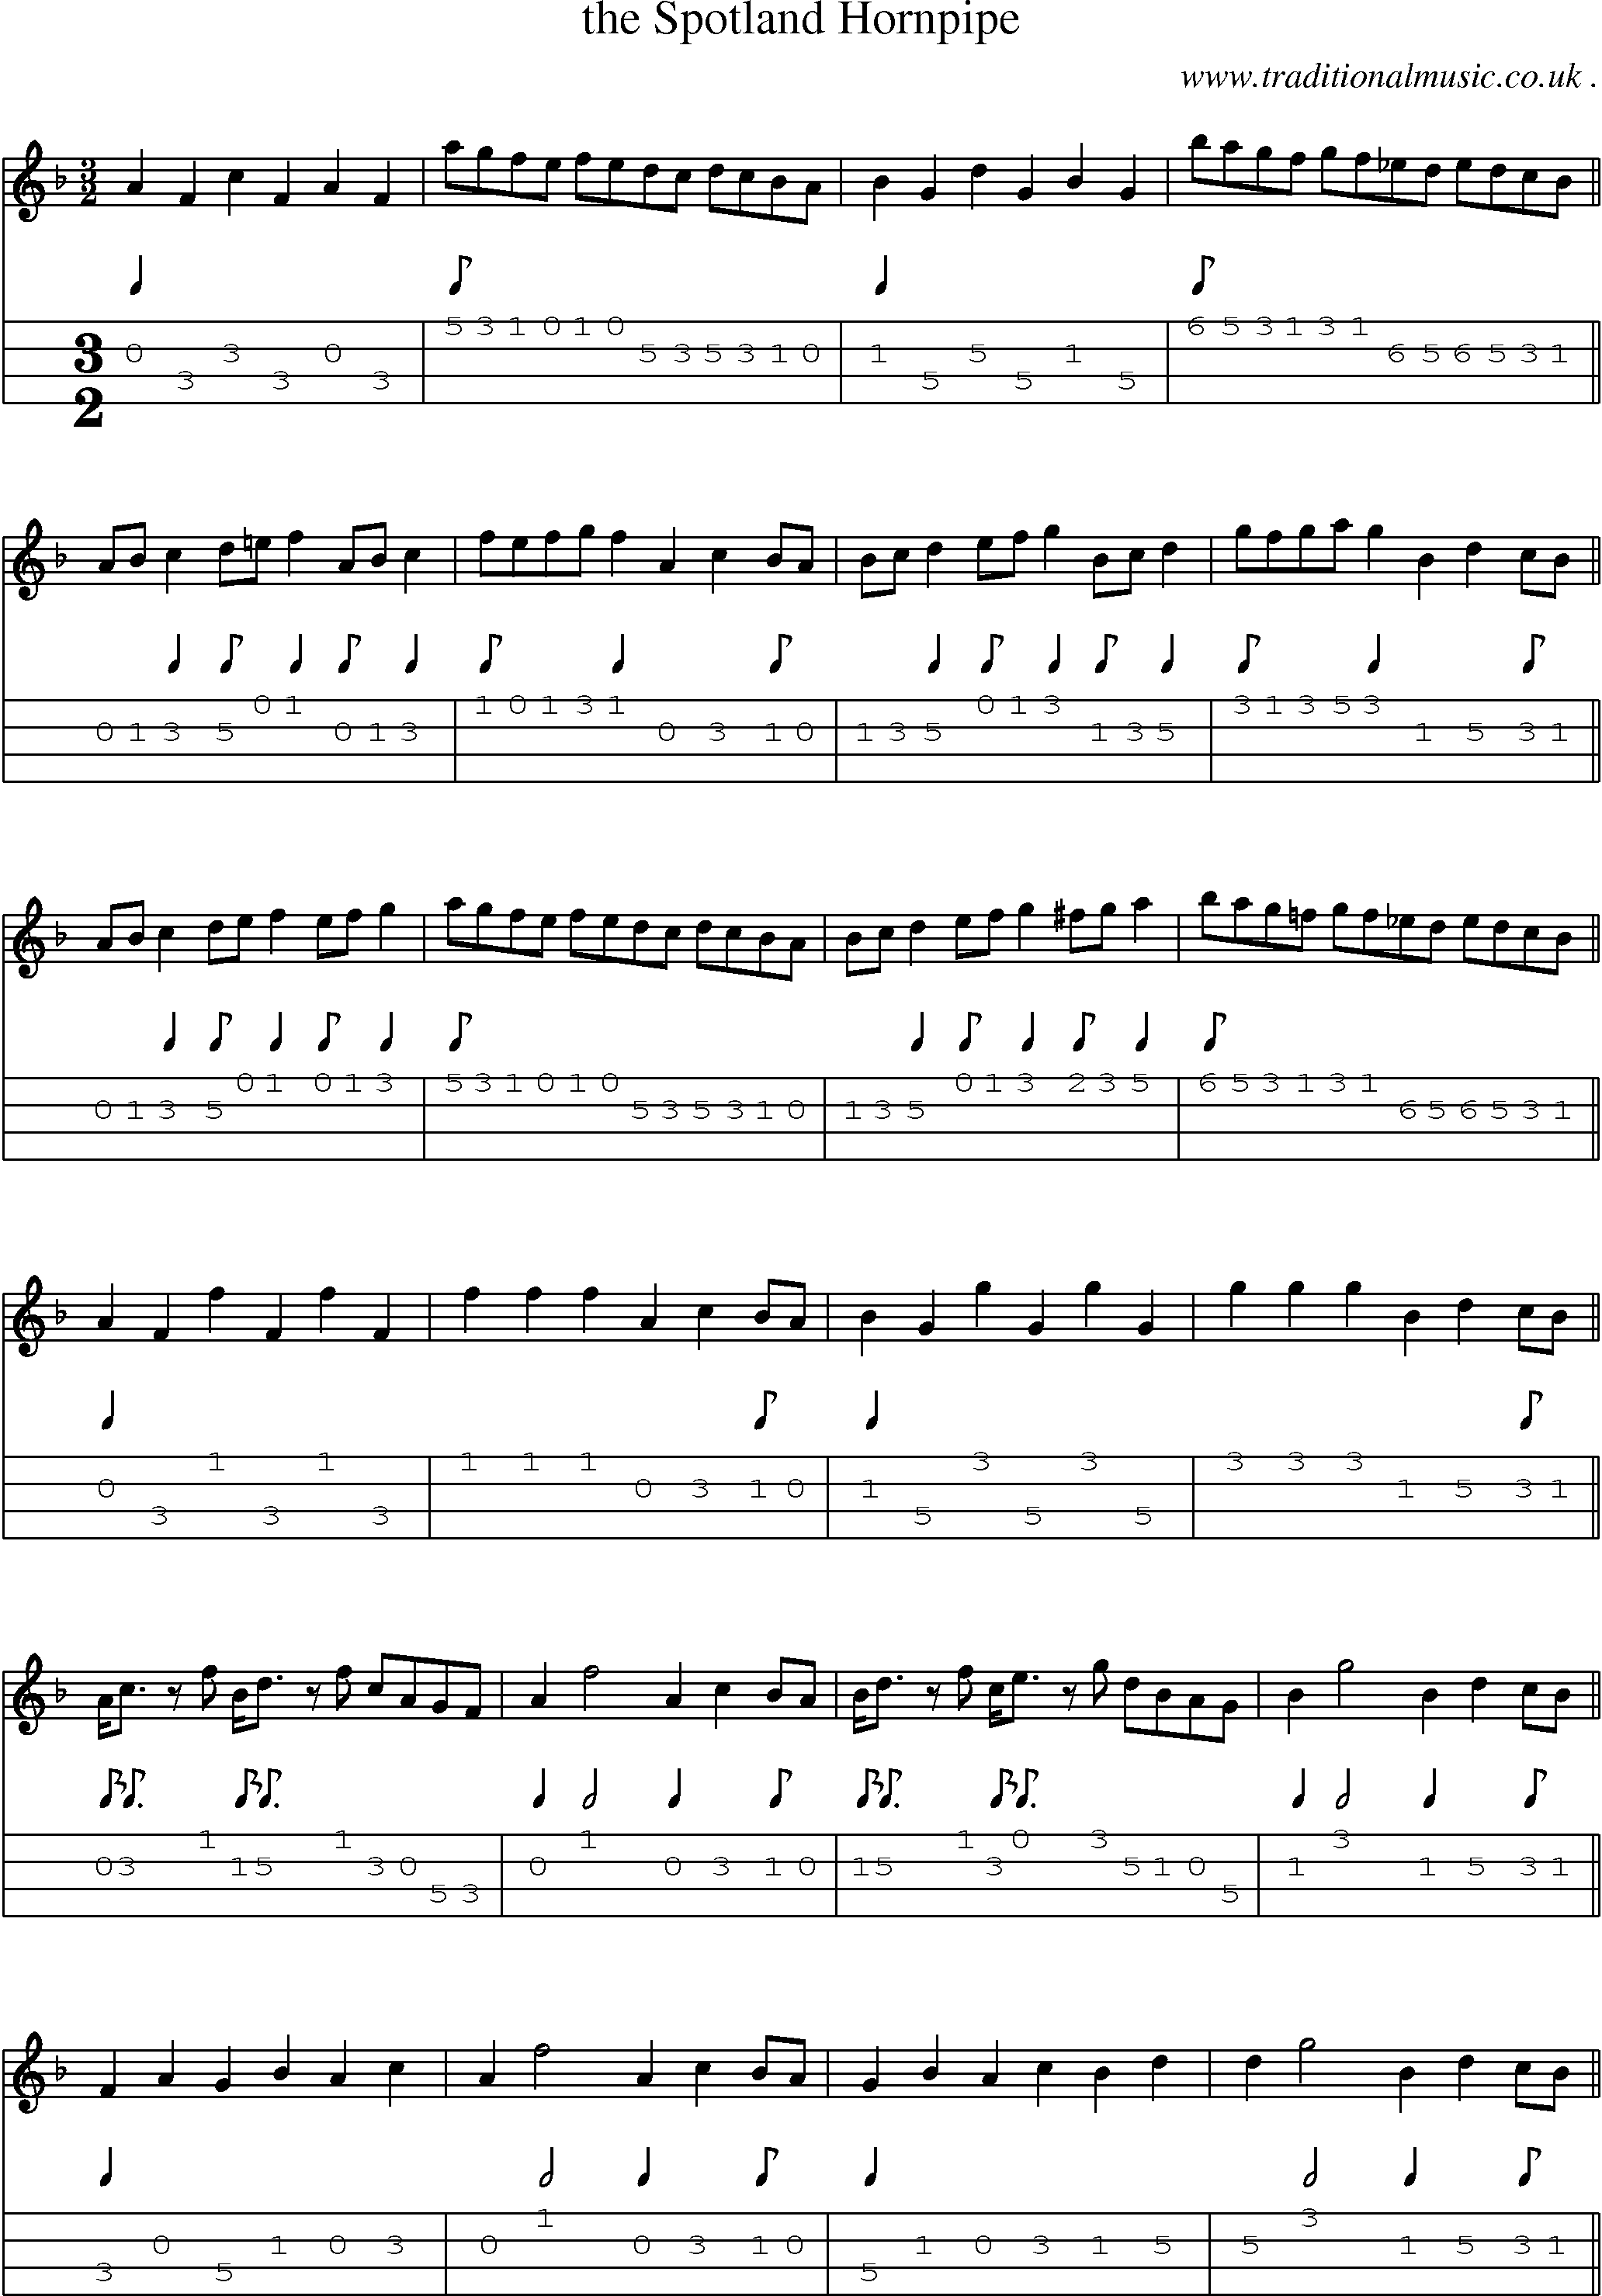 Sheet-Music and Mandolin Tabs for The Spotland Hornpipe